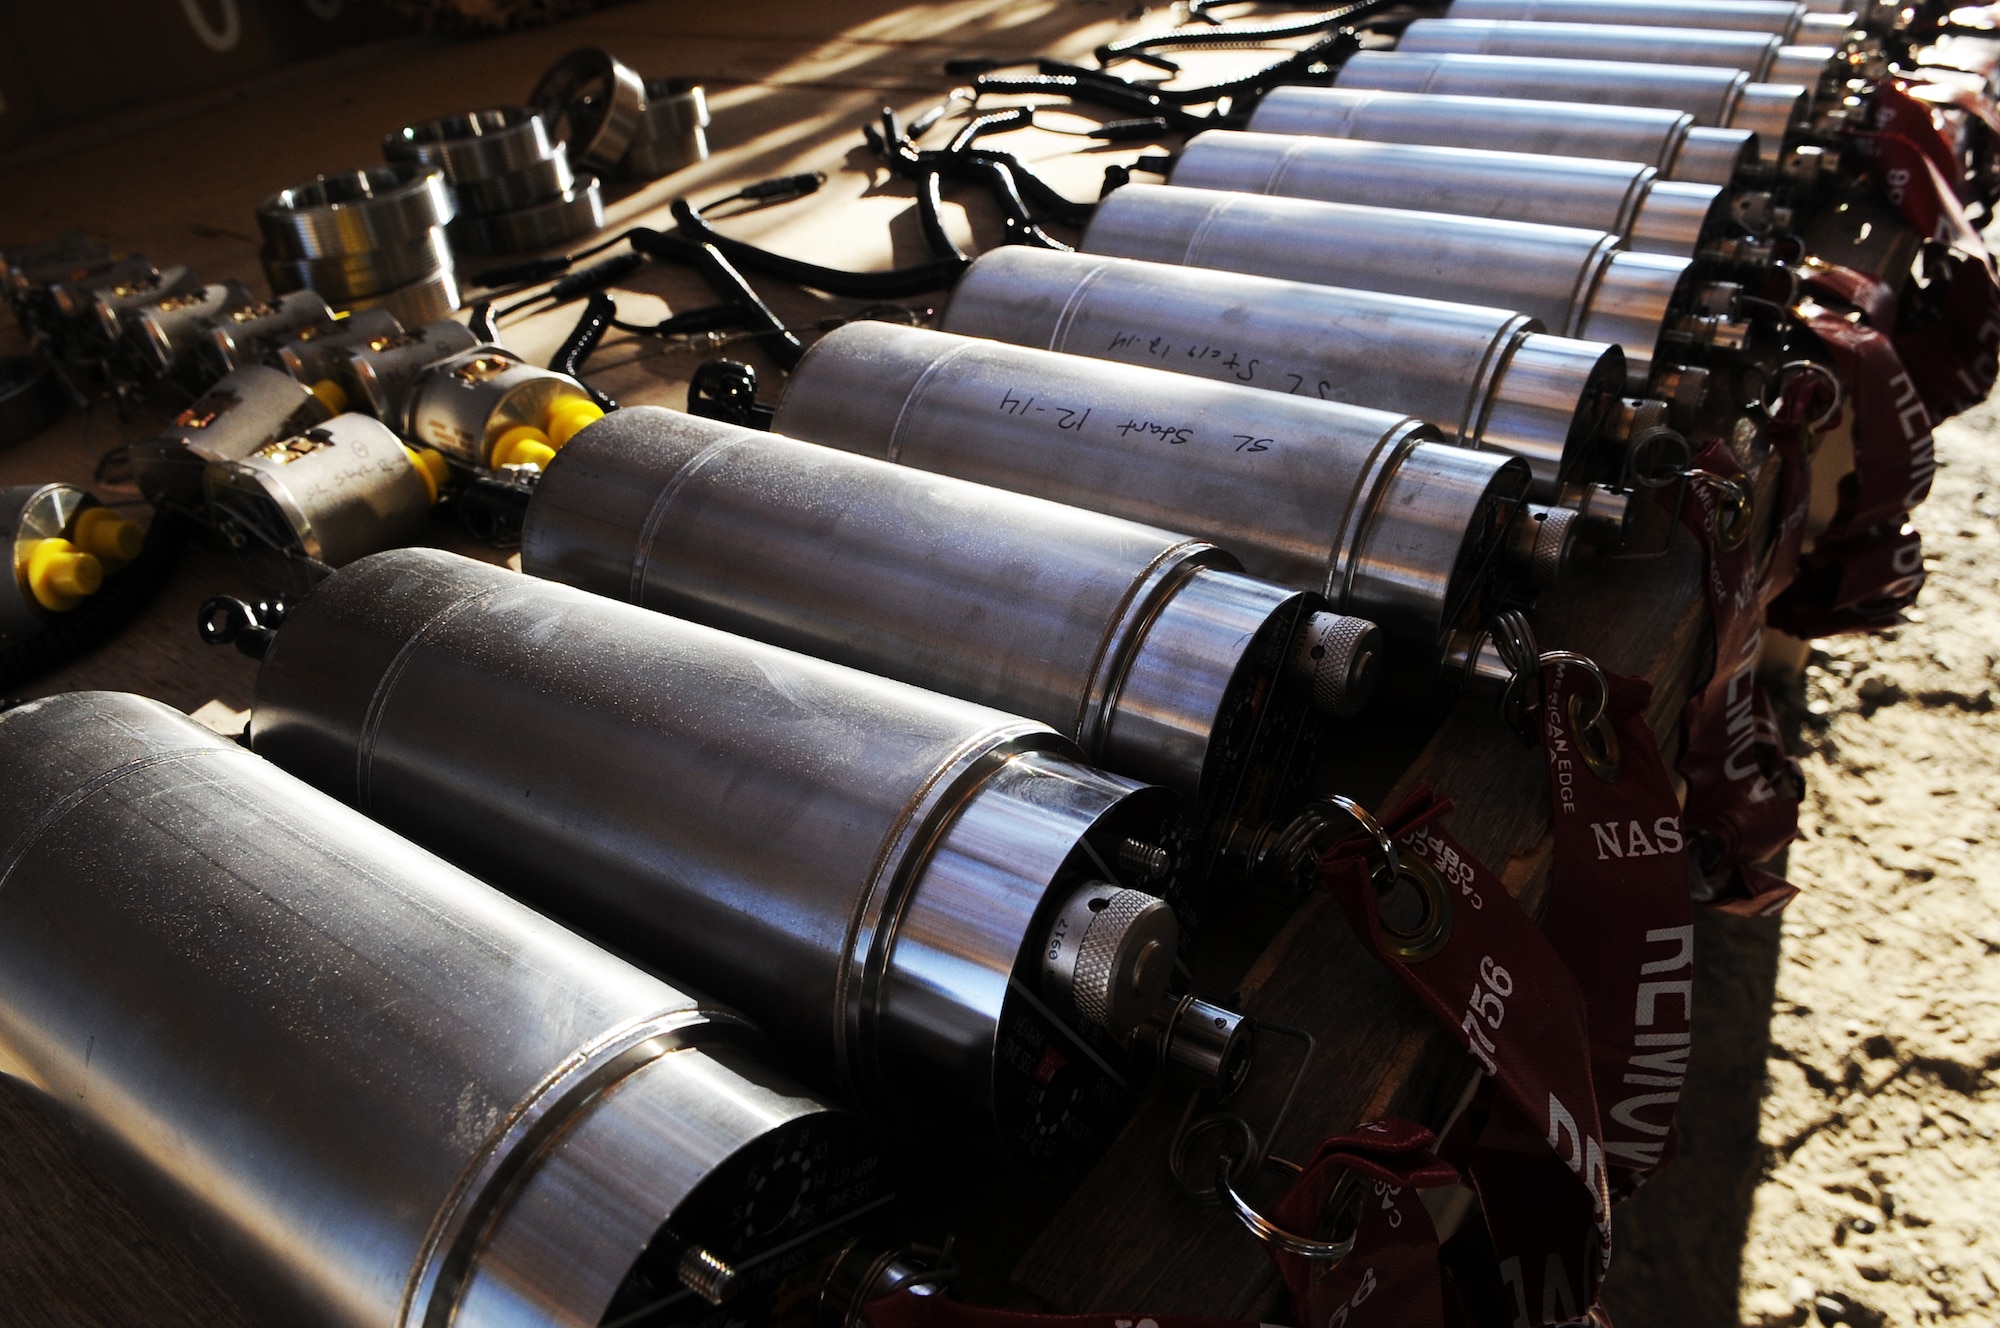 A row of FMU-152 bomb fuzes lay prepped and ready to be installed inside MK-82 munition casings Dec. 21, 2014, in Southwest Asia.  The FMU-152s are the latest type of fuze the Air Force is using when building munitions.  (U.S. Air Force photo/Senior Master Sgt. Carrie Hinson)